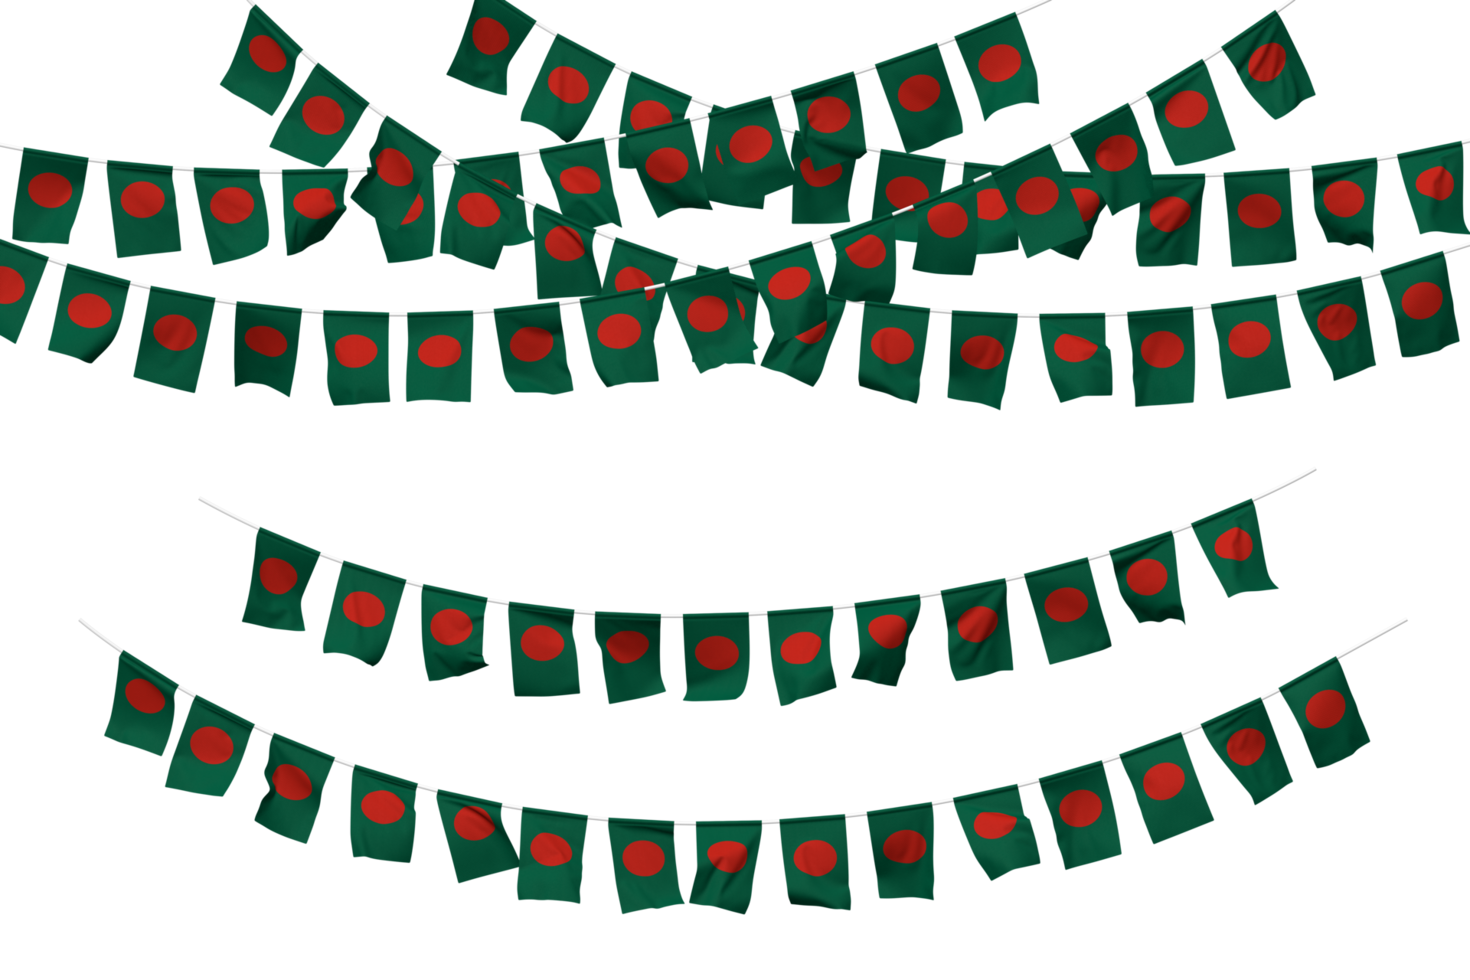 Bangladesh Flag Bunting Decoration on The Rope, Jhandi, Set of Small Flag Celebration, 3D Rendering png